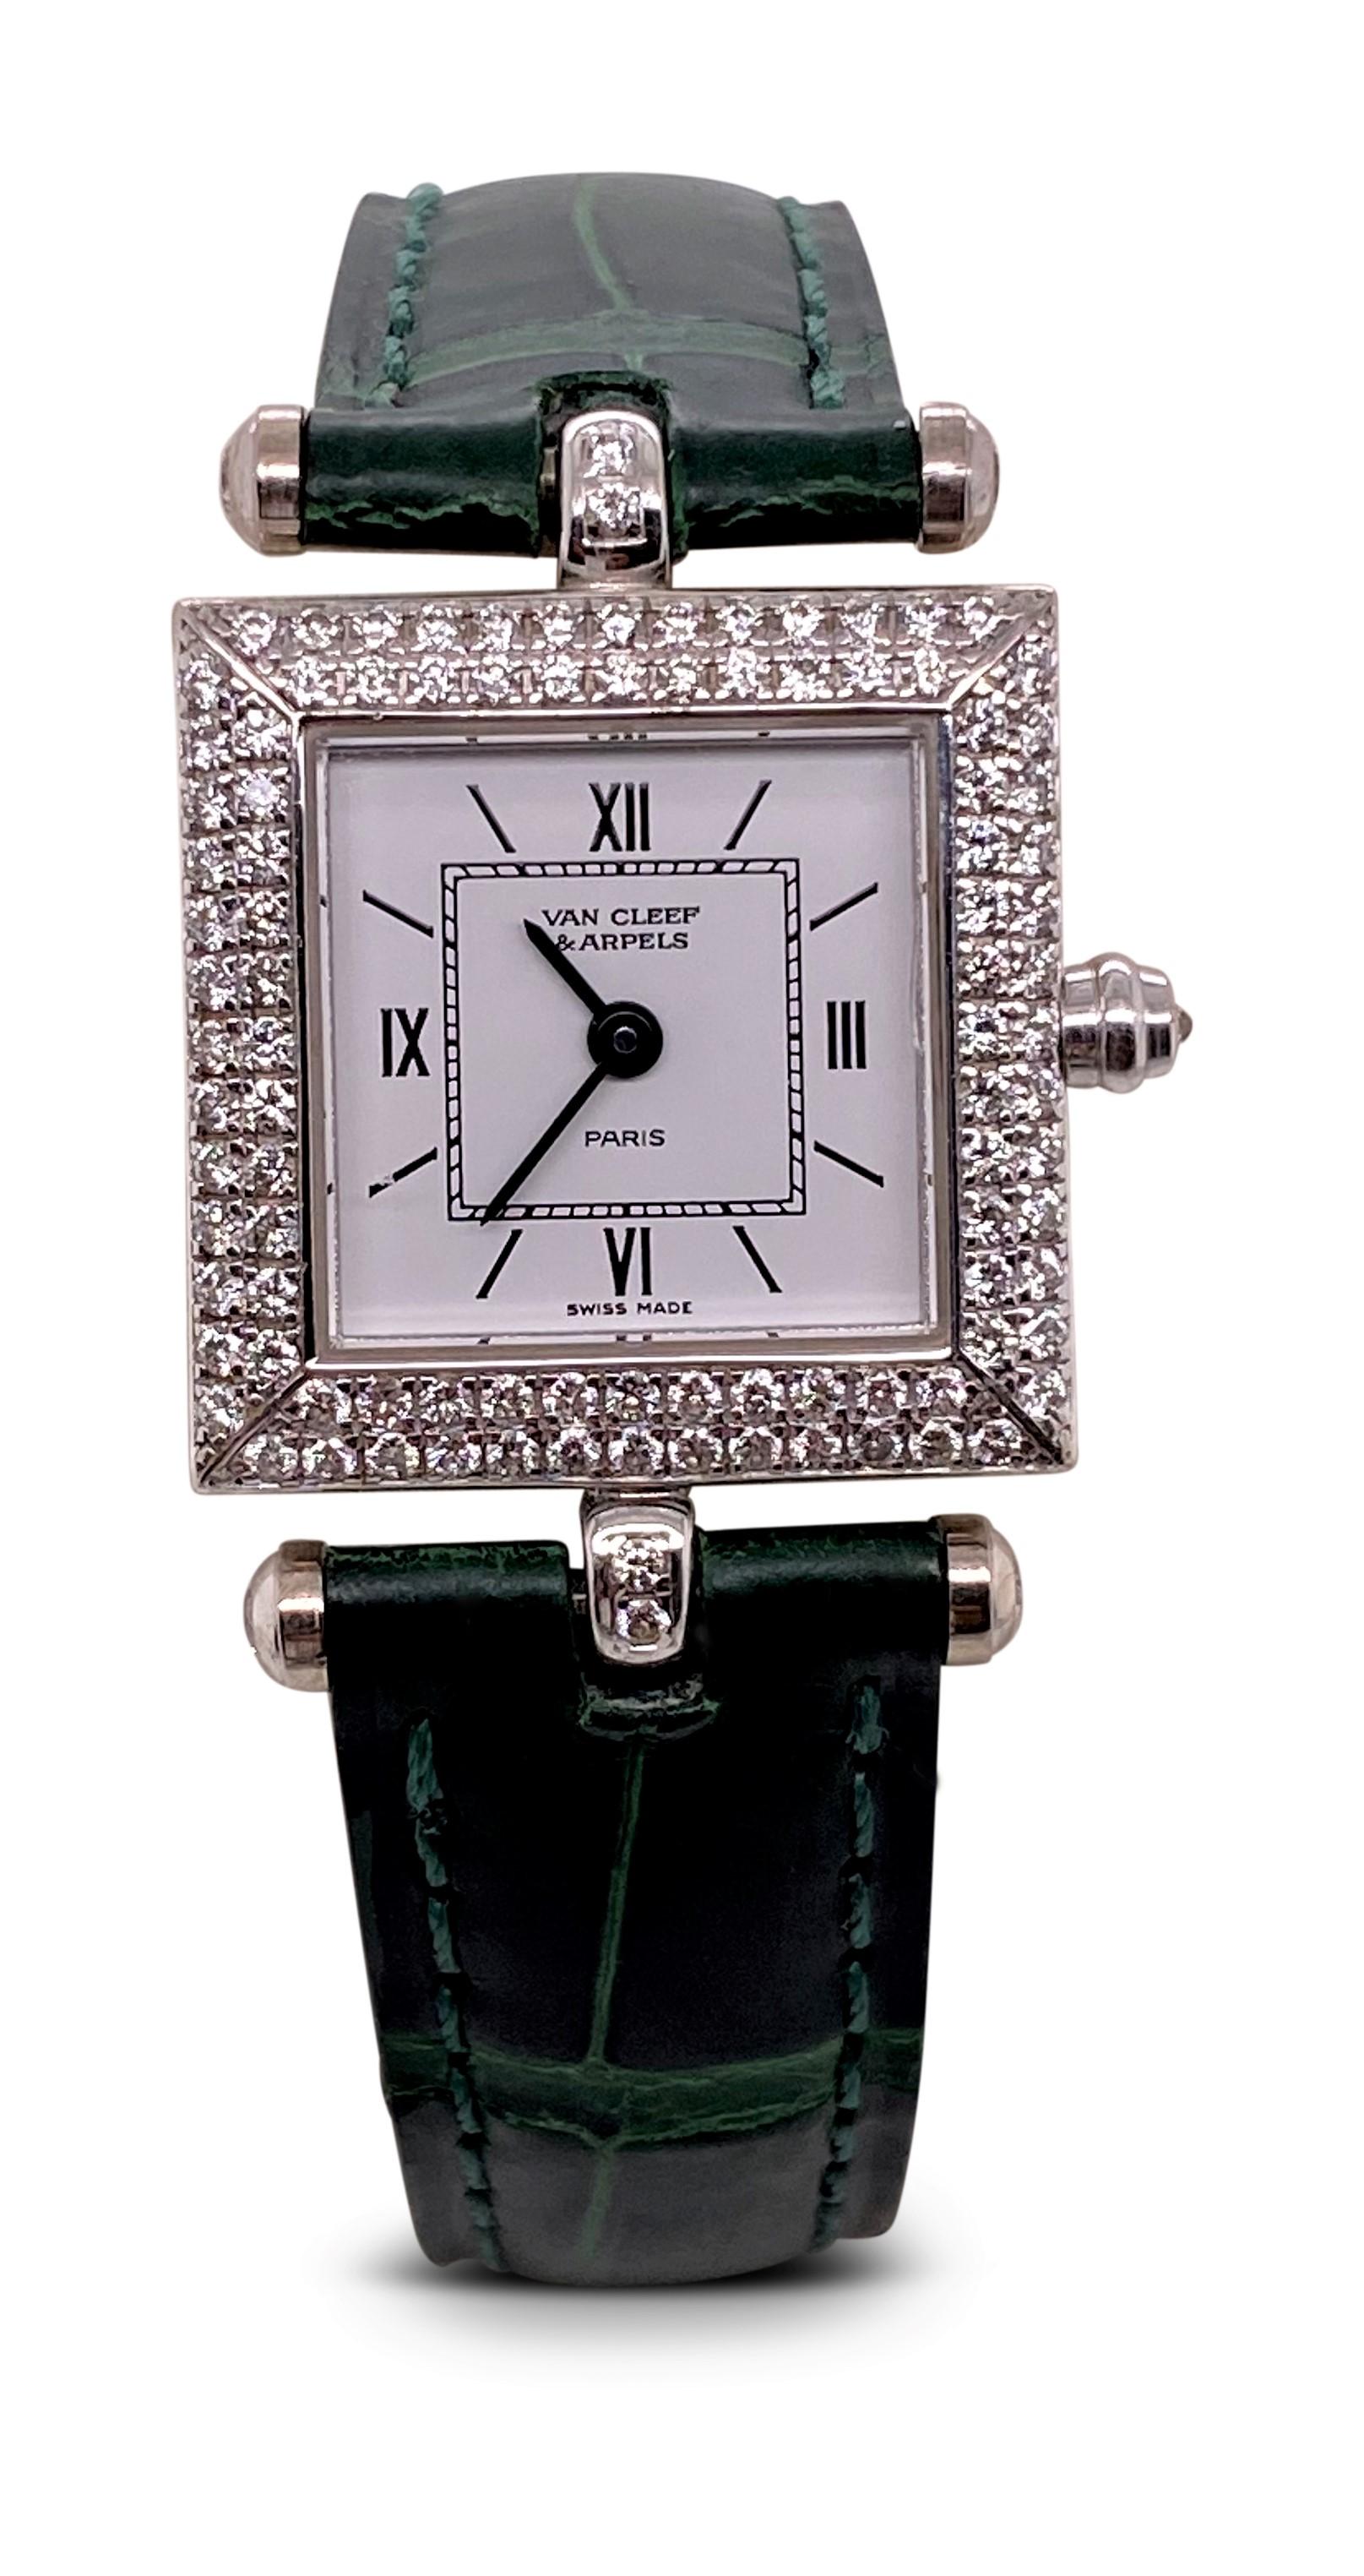 Authentic Van Cleef & Arpels 'Classique' watch crafted in 18 karat white gold with a double row diamond bezel. The rectangular watch case measures 20 x 20 mm without lugs. Both the watch bezel and lugs are set with an estimated 1.05 carats of round